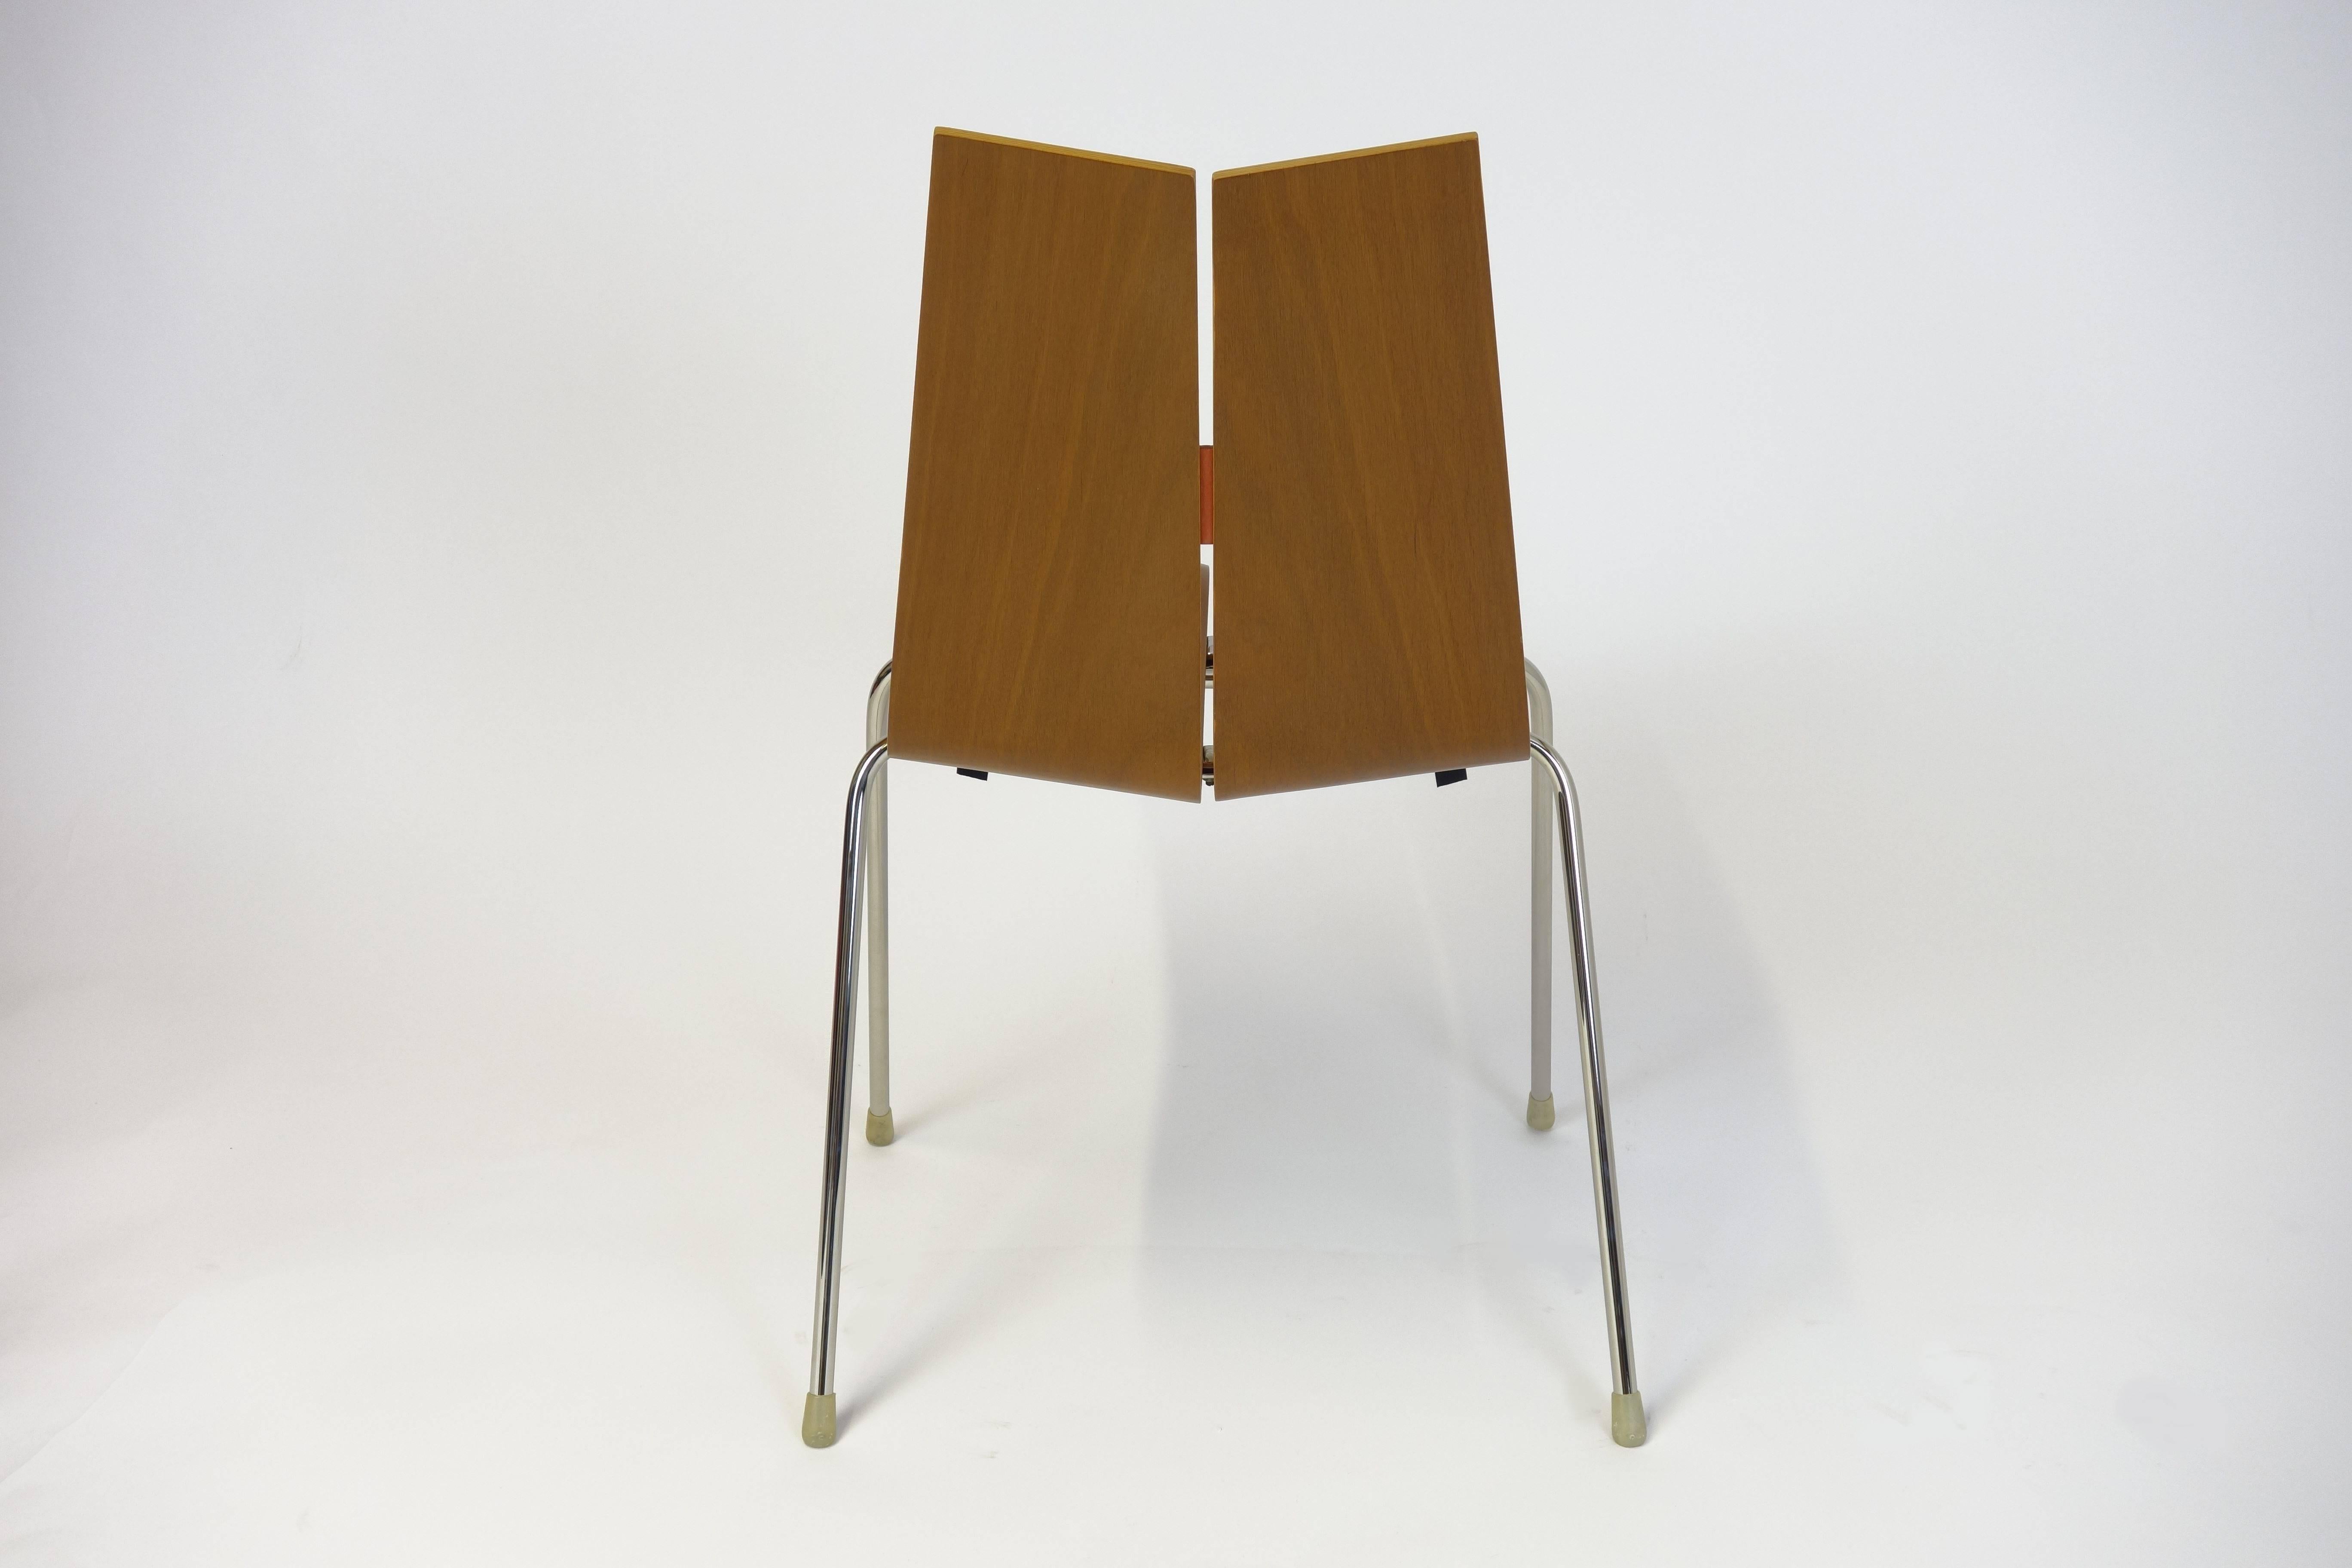 Stacking Chairs Designed by Hans Bellmann, Horgen-Glarus Seat Stool, 1952 In Good Condition For Sale In Perchtoldsdorf, AT